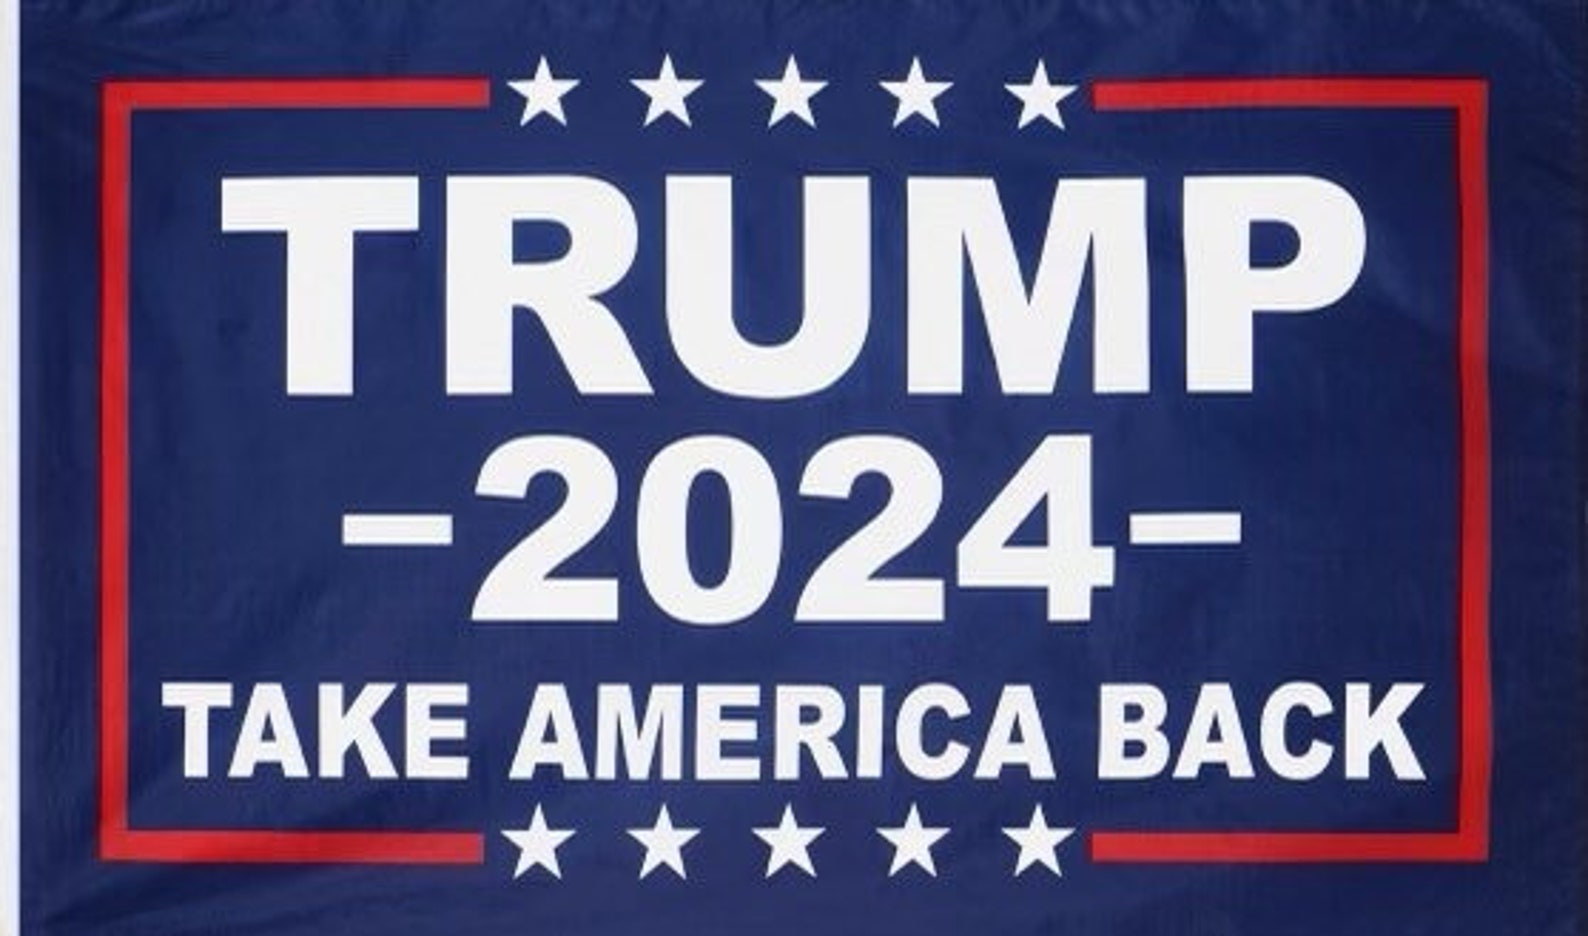 Trump 2024 Take America Back Double Side 3x5 Ft Flag Etsy